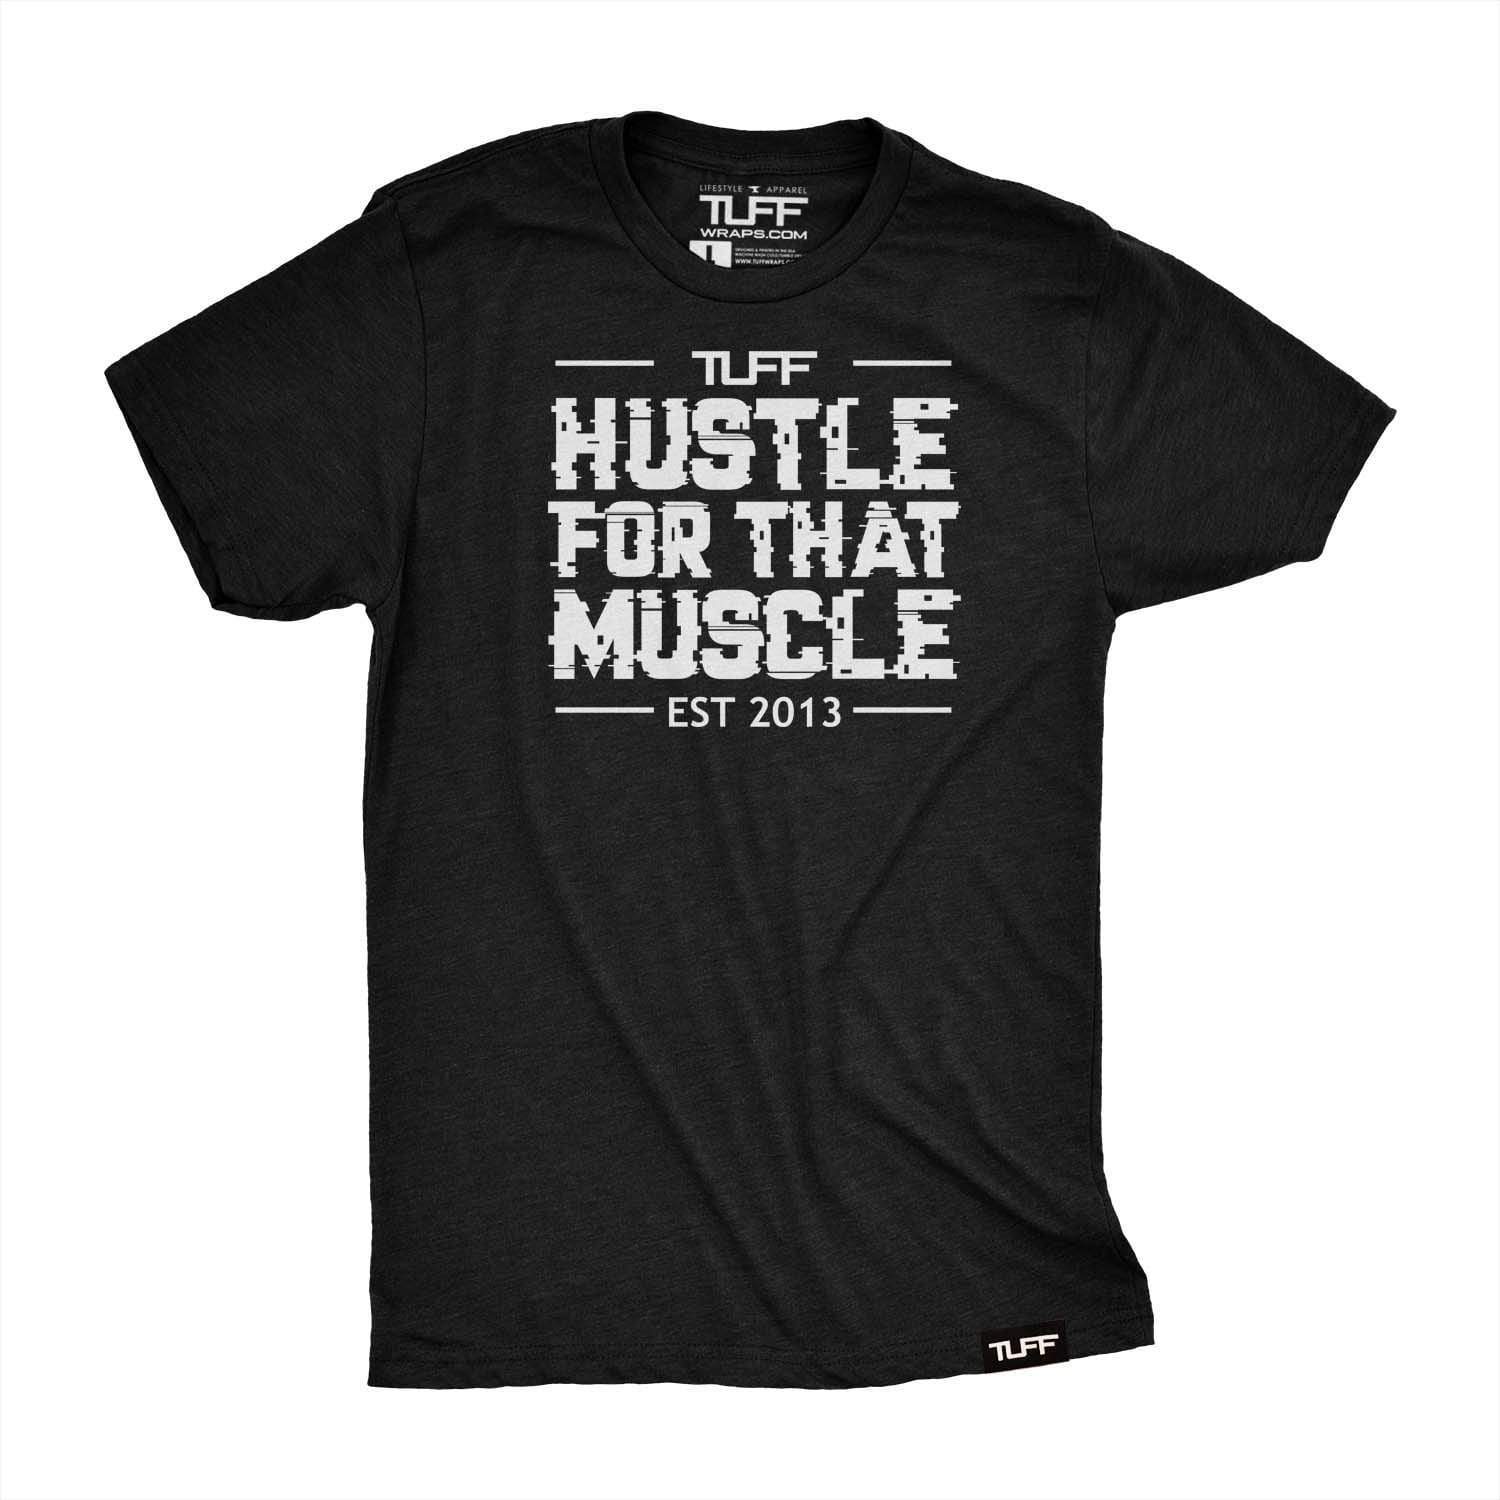 Hustle For That Muscle Tee S / Black TuffWraps.com